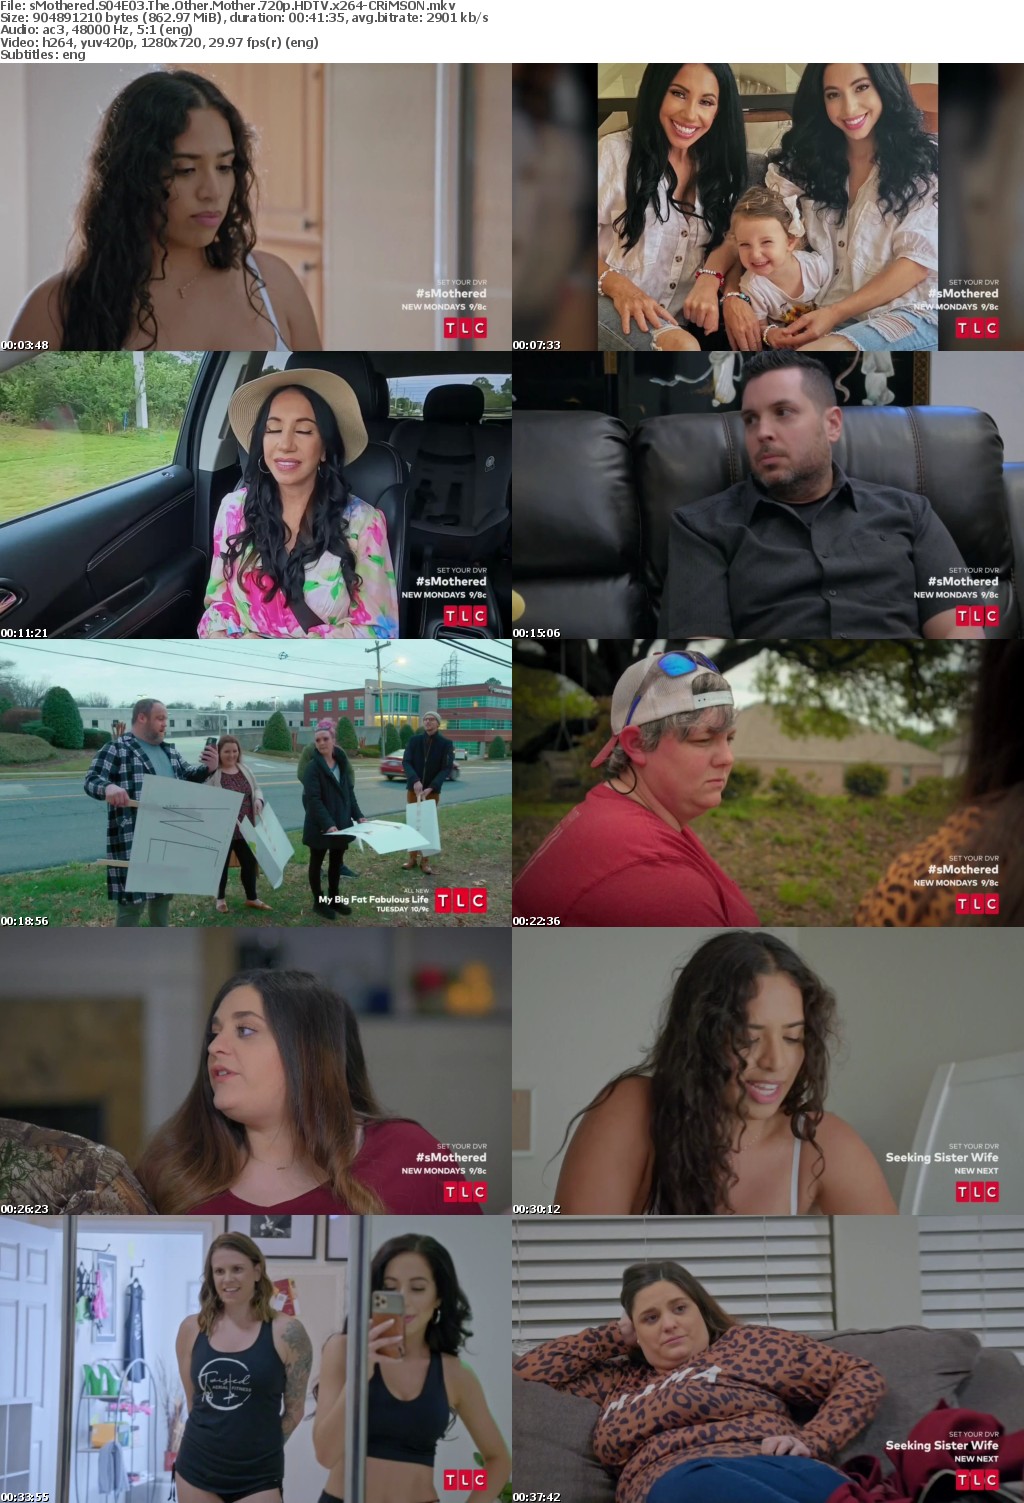 sMothered S04E03 The Other Mother 720p HDTV x264-CRiMSON